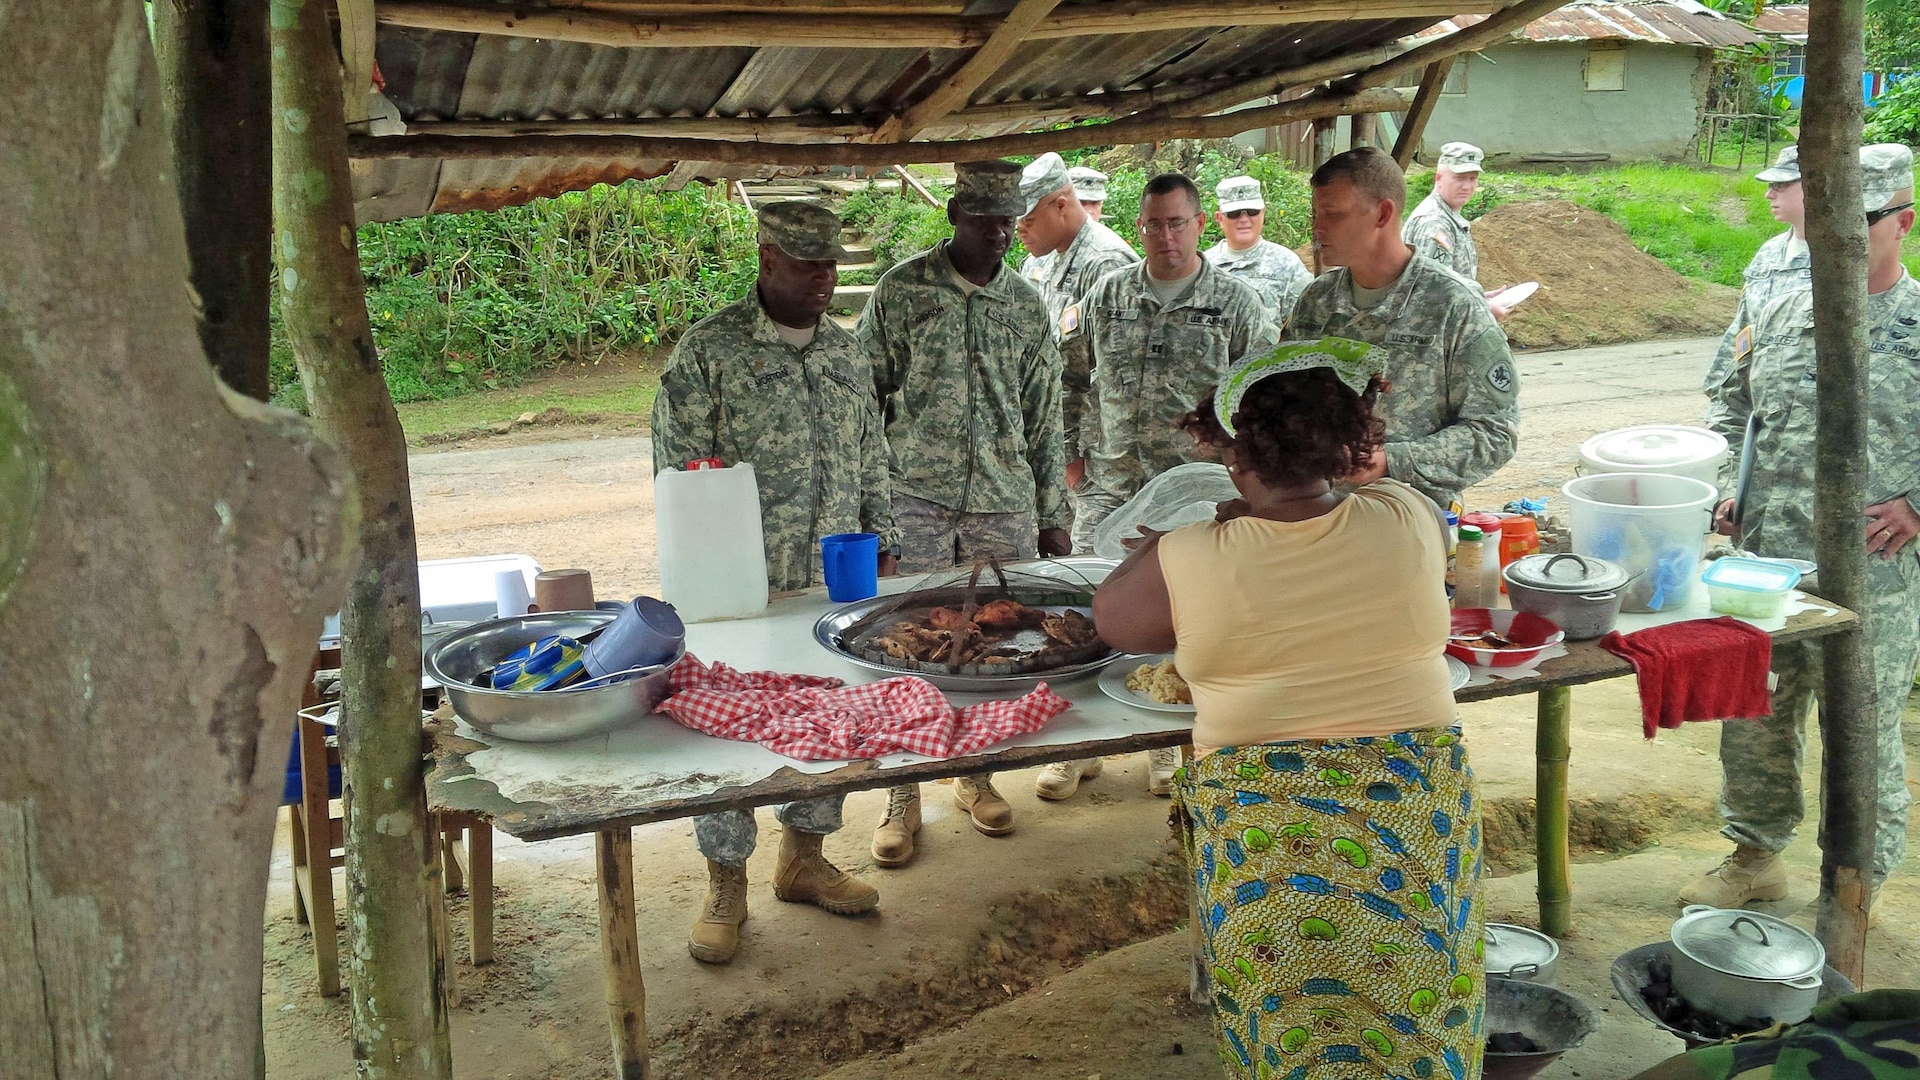 Michigan Army National Guard Soldiers sample local cuisine while on a staff assistance visit to Monrovia, Liberia, Sept. 25, 2015. The Michigan Soldiers will deploy to Liberia in October for one year to support Operation Onward Liberty, a United States Africa Command defense sector reform initiative developed to facilitate implementation of the Liberian National Defense Act by creating a responsible, operationally capable military. 